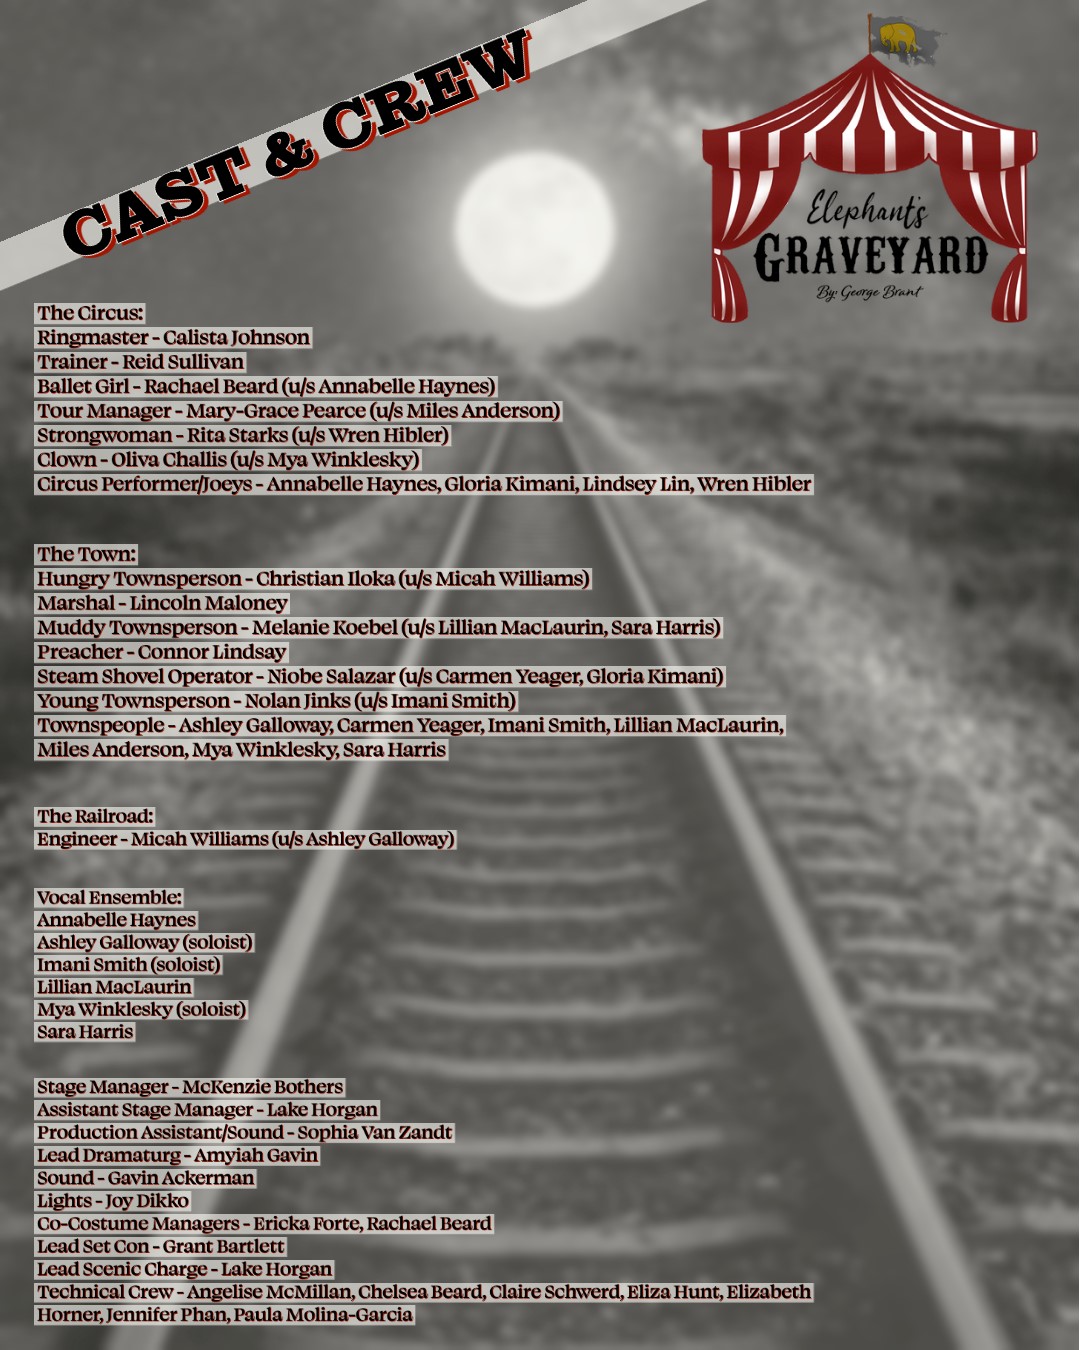 Casting Posted for Elephants Graveyard